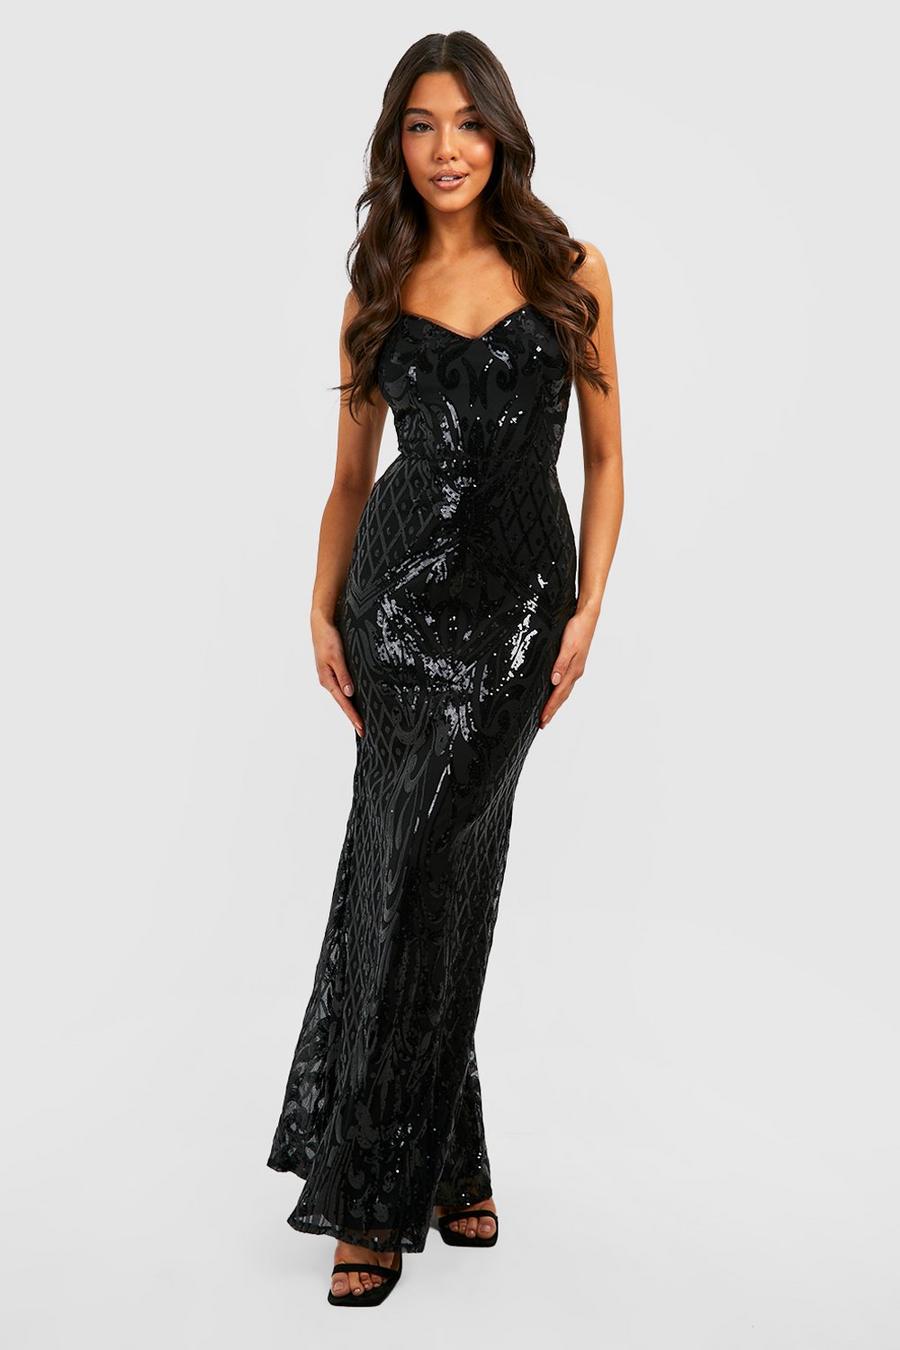 Black Sequin Damask Open Back Fishtail Maxi Party Dress image number 1